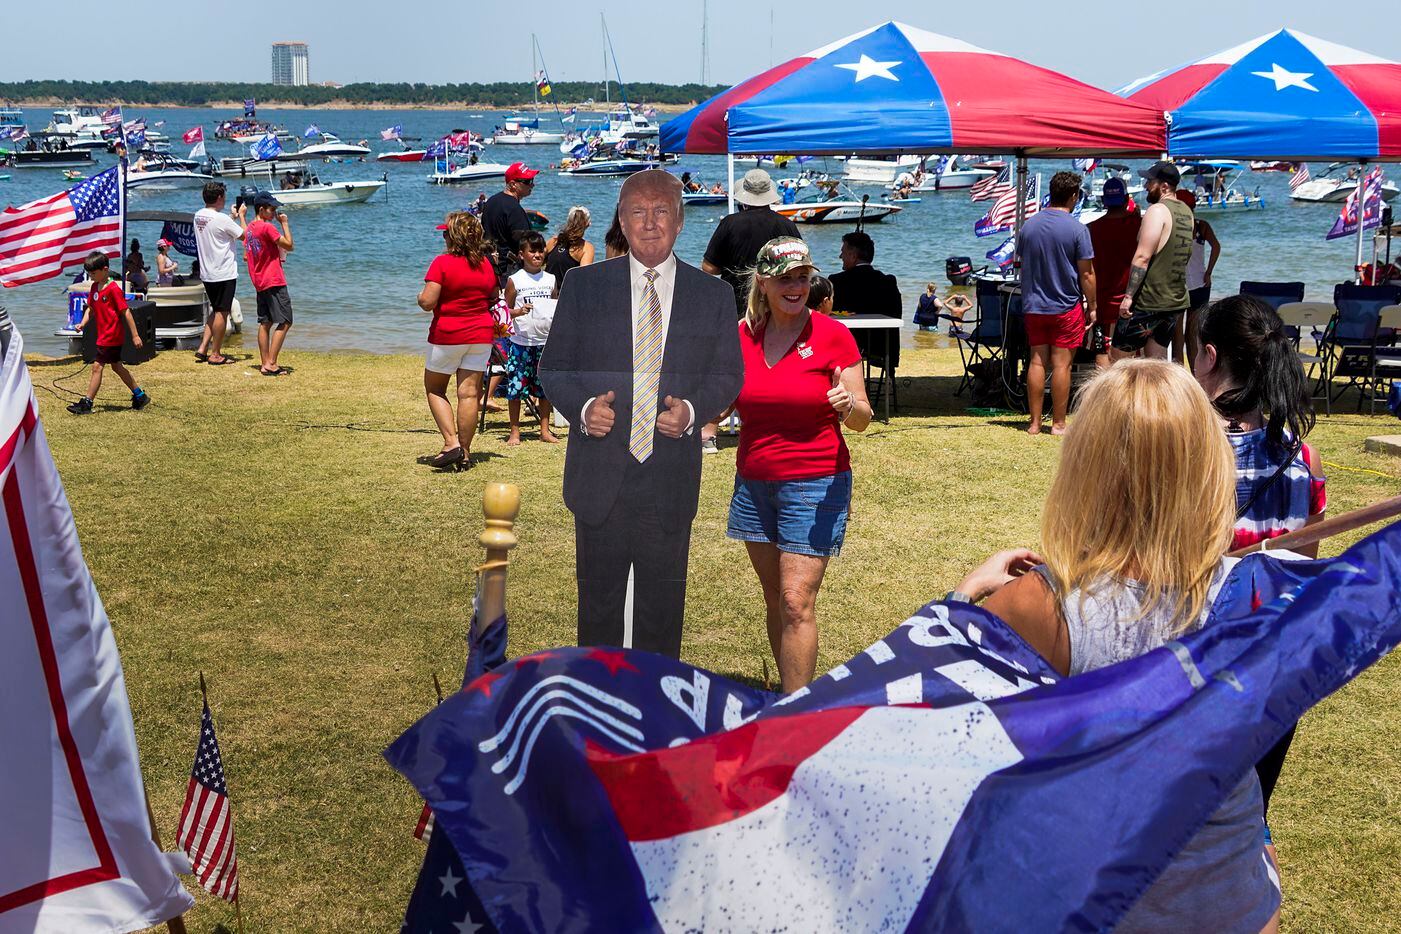 Supporters of President Donald Trump pose for photos with a cutout during a campaign rally and boat parade at Oak Grove Park on Grapevine Lake on Saturday, Aug. 15, 2020.